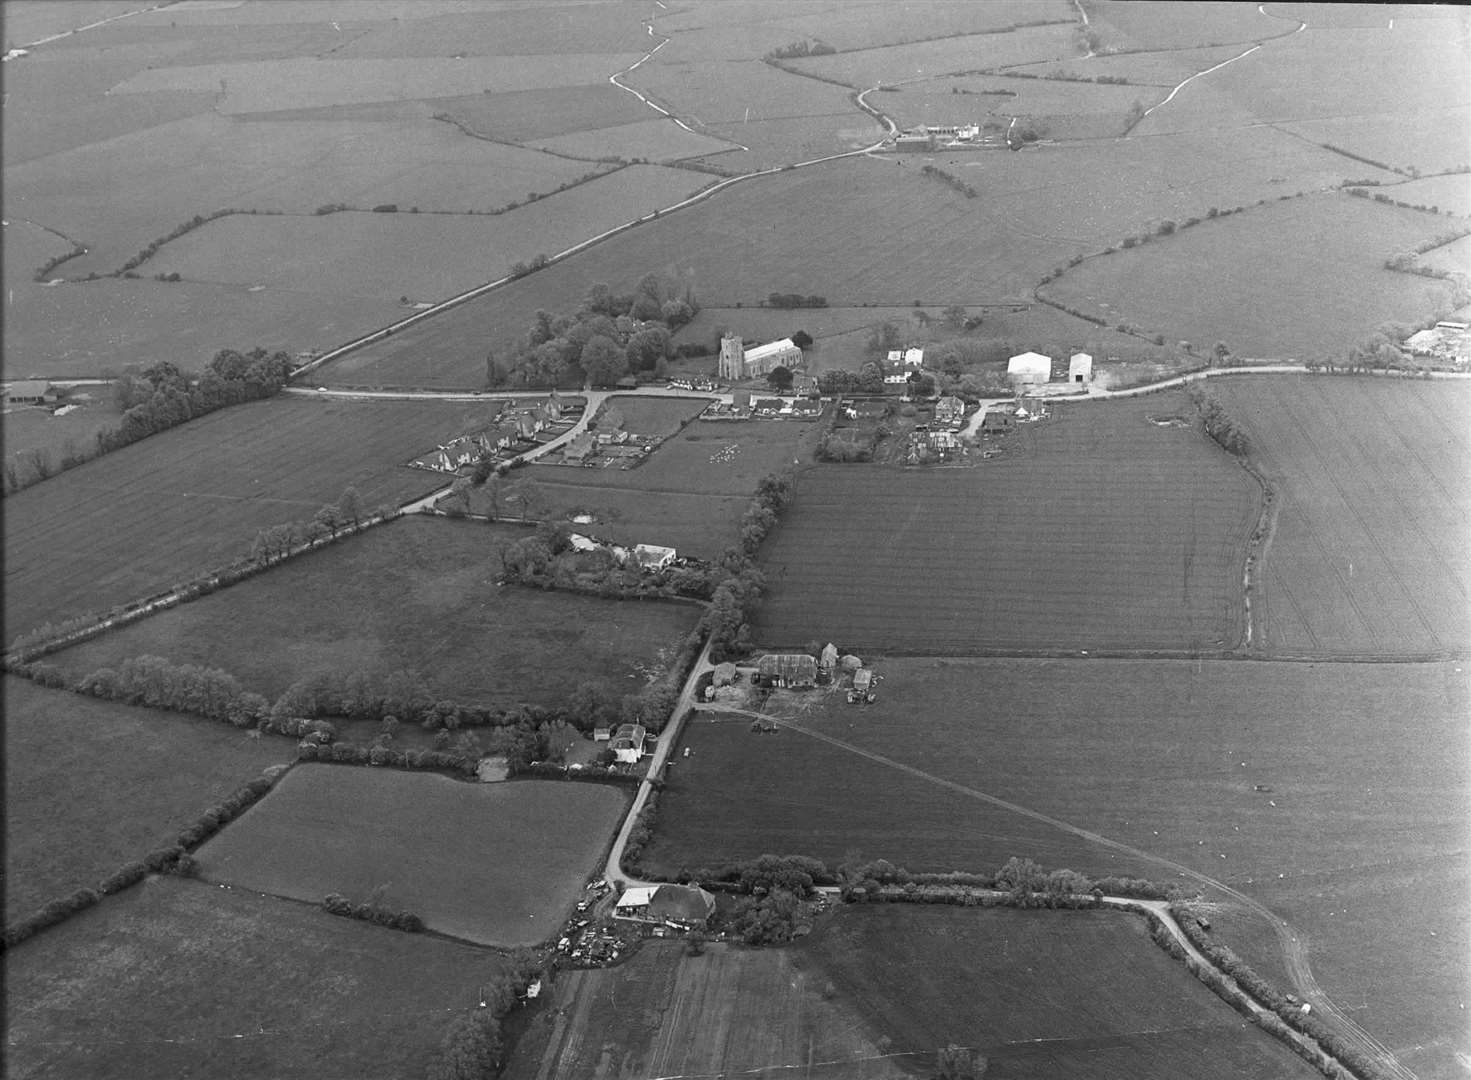 Ivychurch from above in 1968